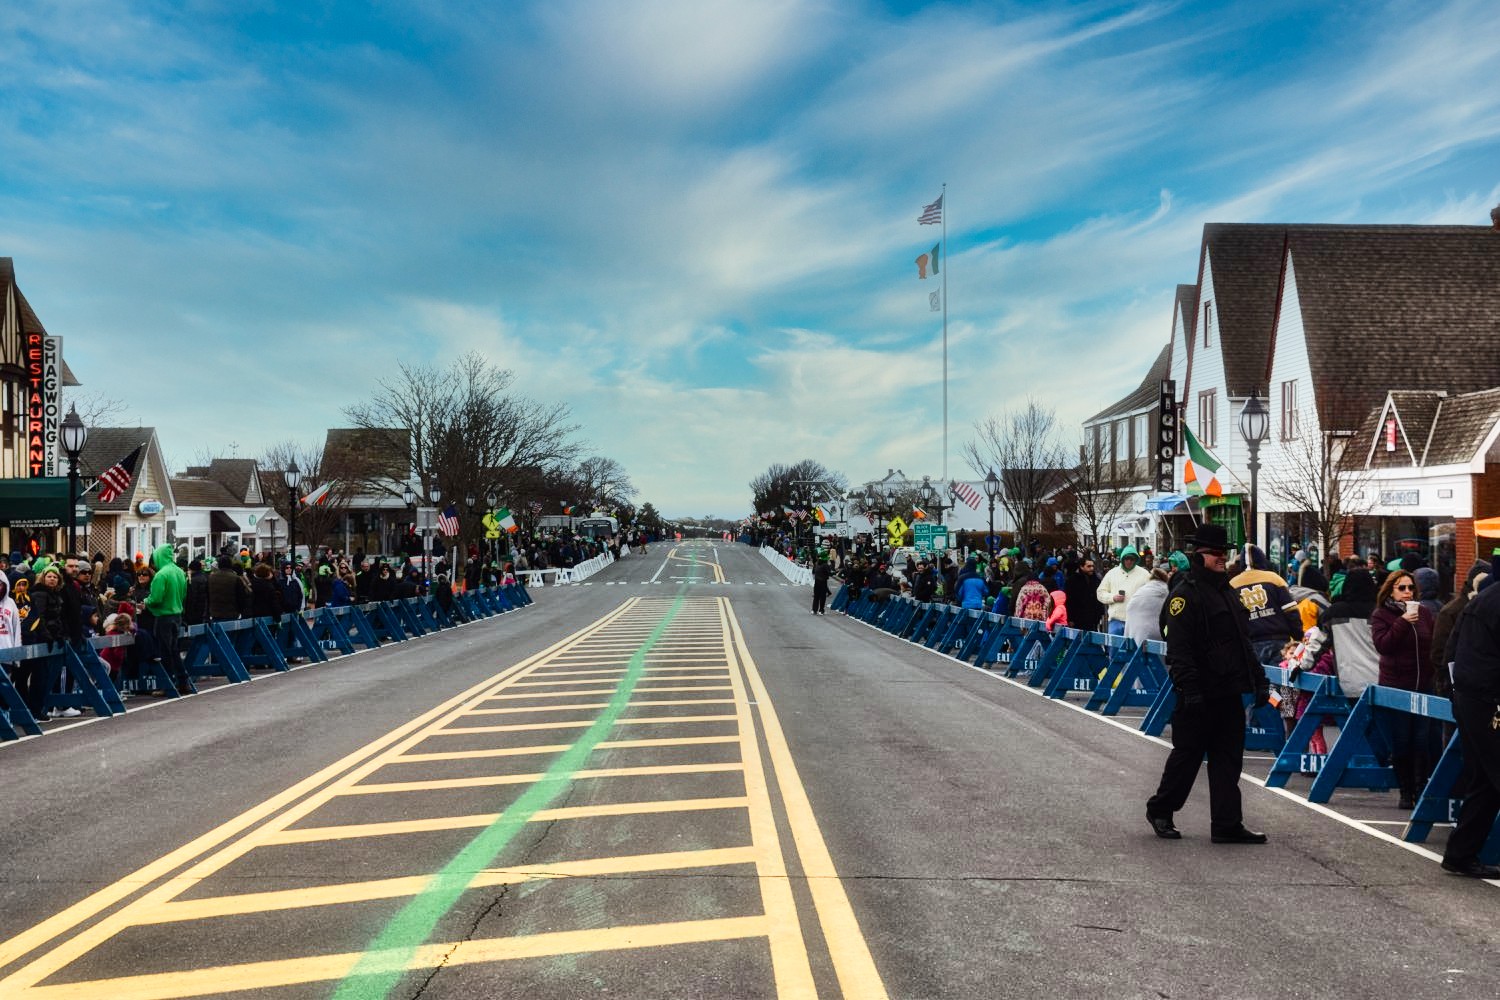 St. Patrick's Day Parade in Montauk